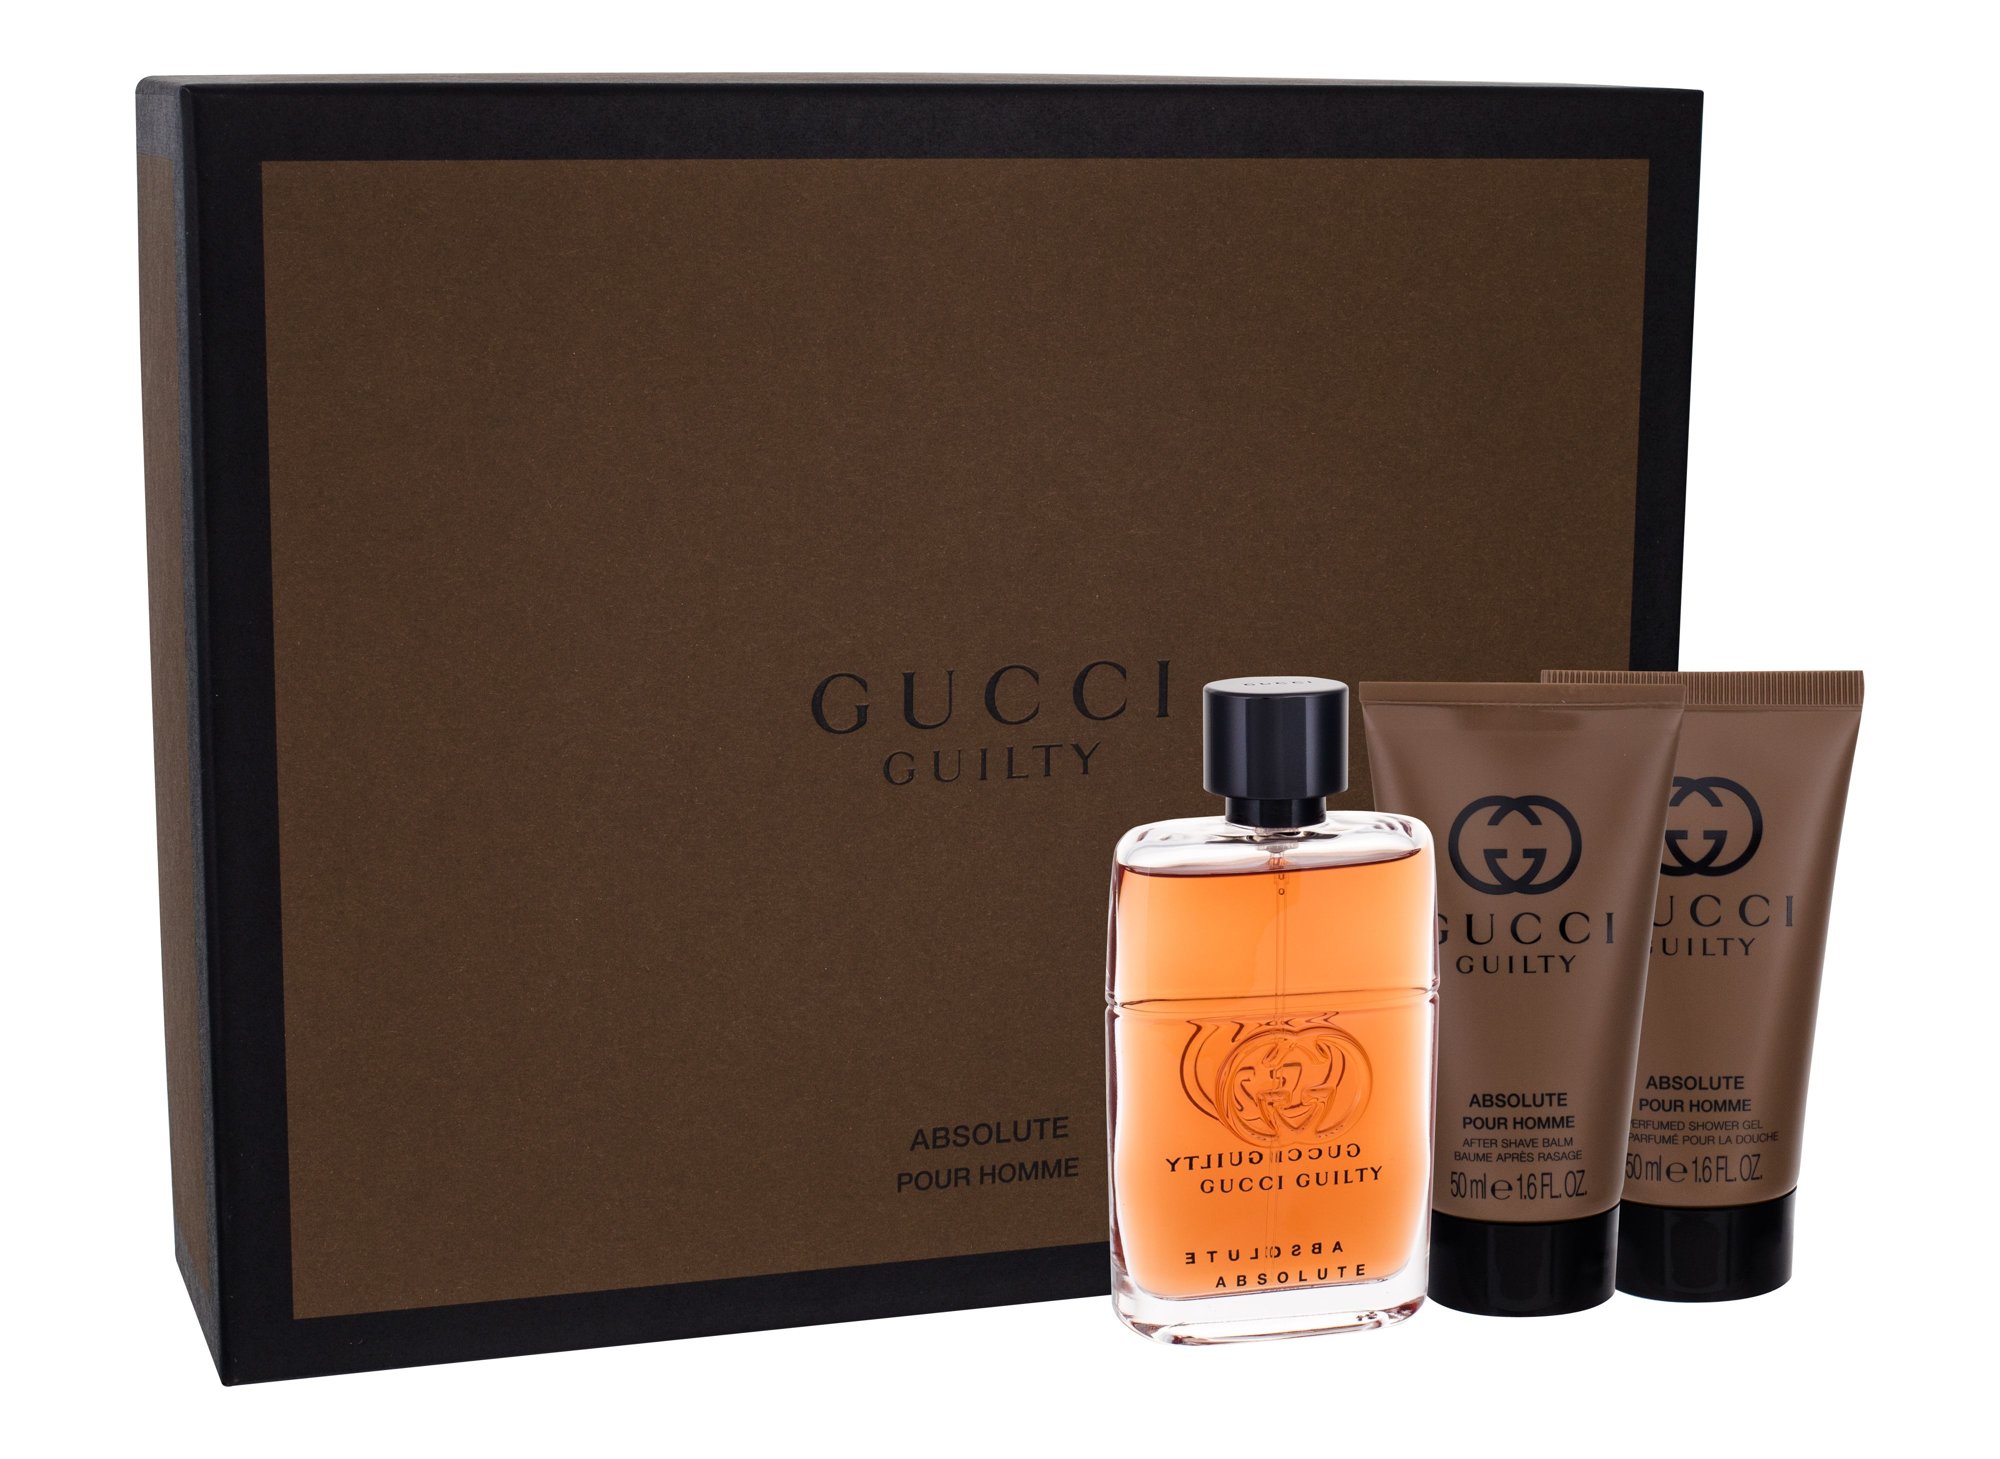 Gucci Guilty Absolute pour homme 50ml EDP 50 ML + AFTERSHAVE BALM 50 ML + SHOWER GEL 50 ML Kvepalai Vyrams EDP